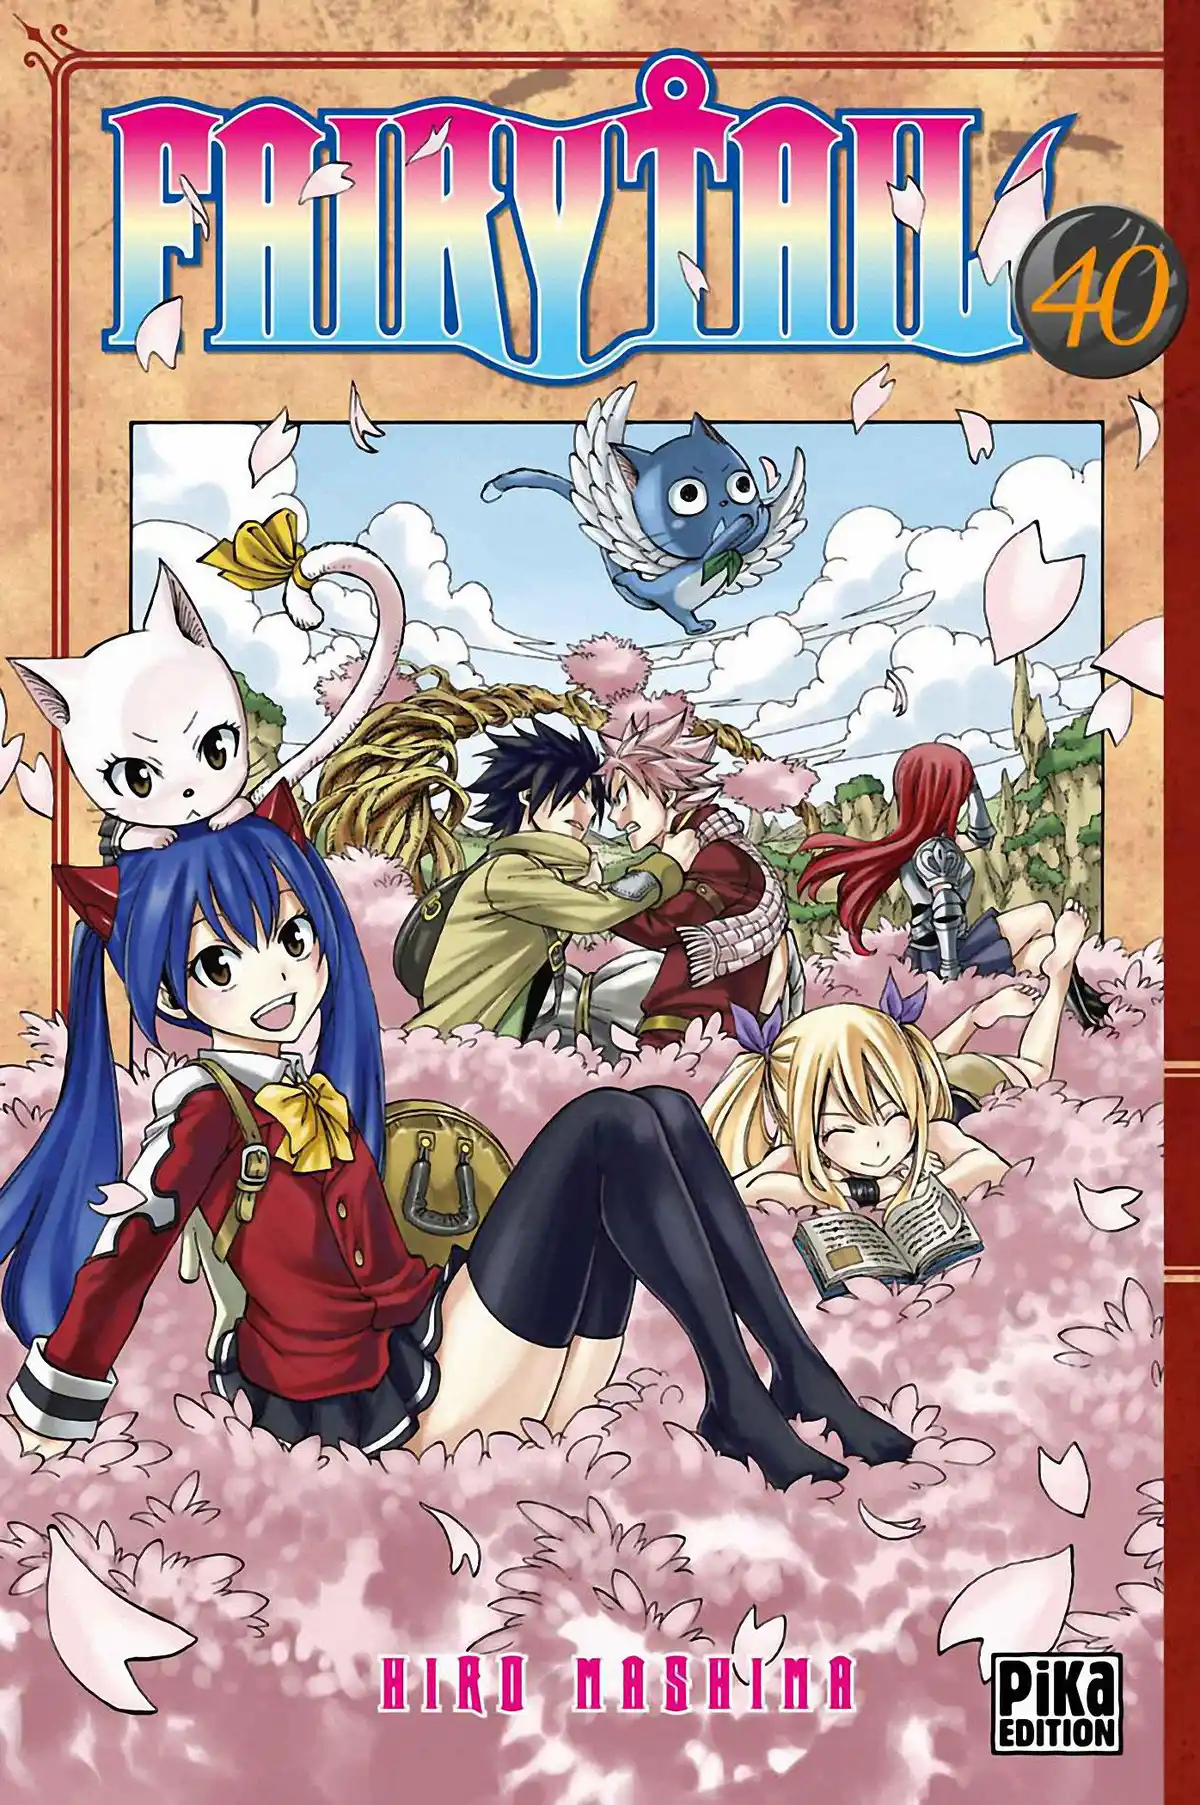 Fairy Tail Volume 40 page 1